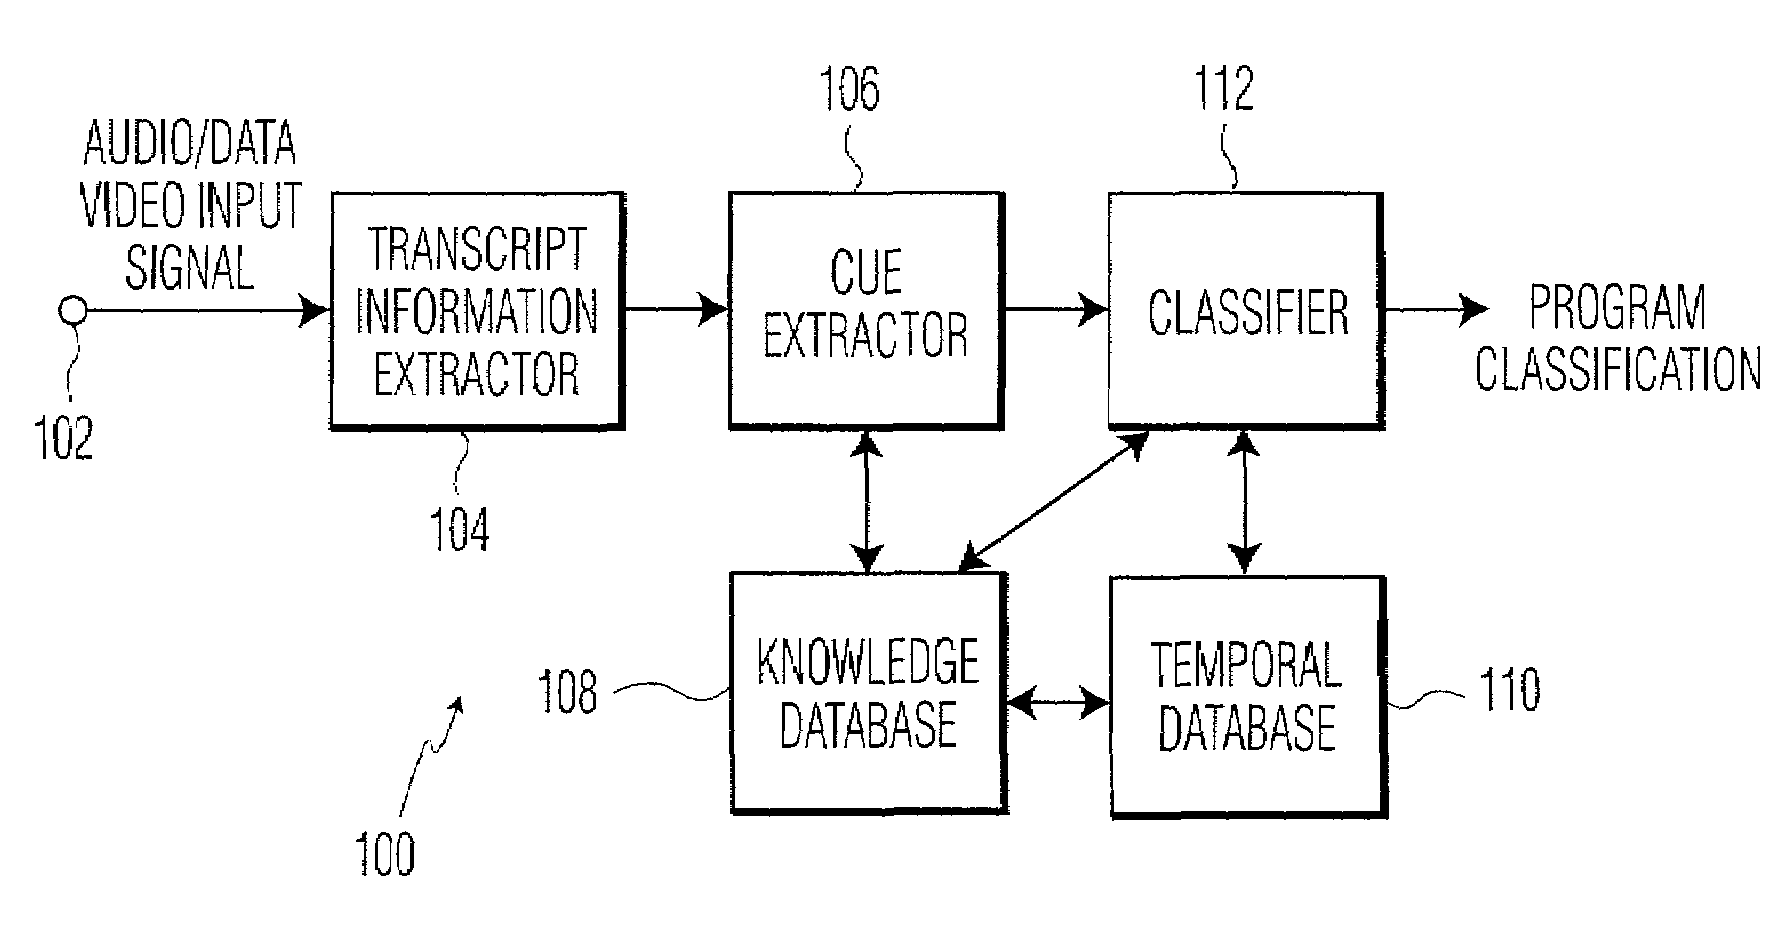 Apparatus and method of program classification using observed cues in the transcript information